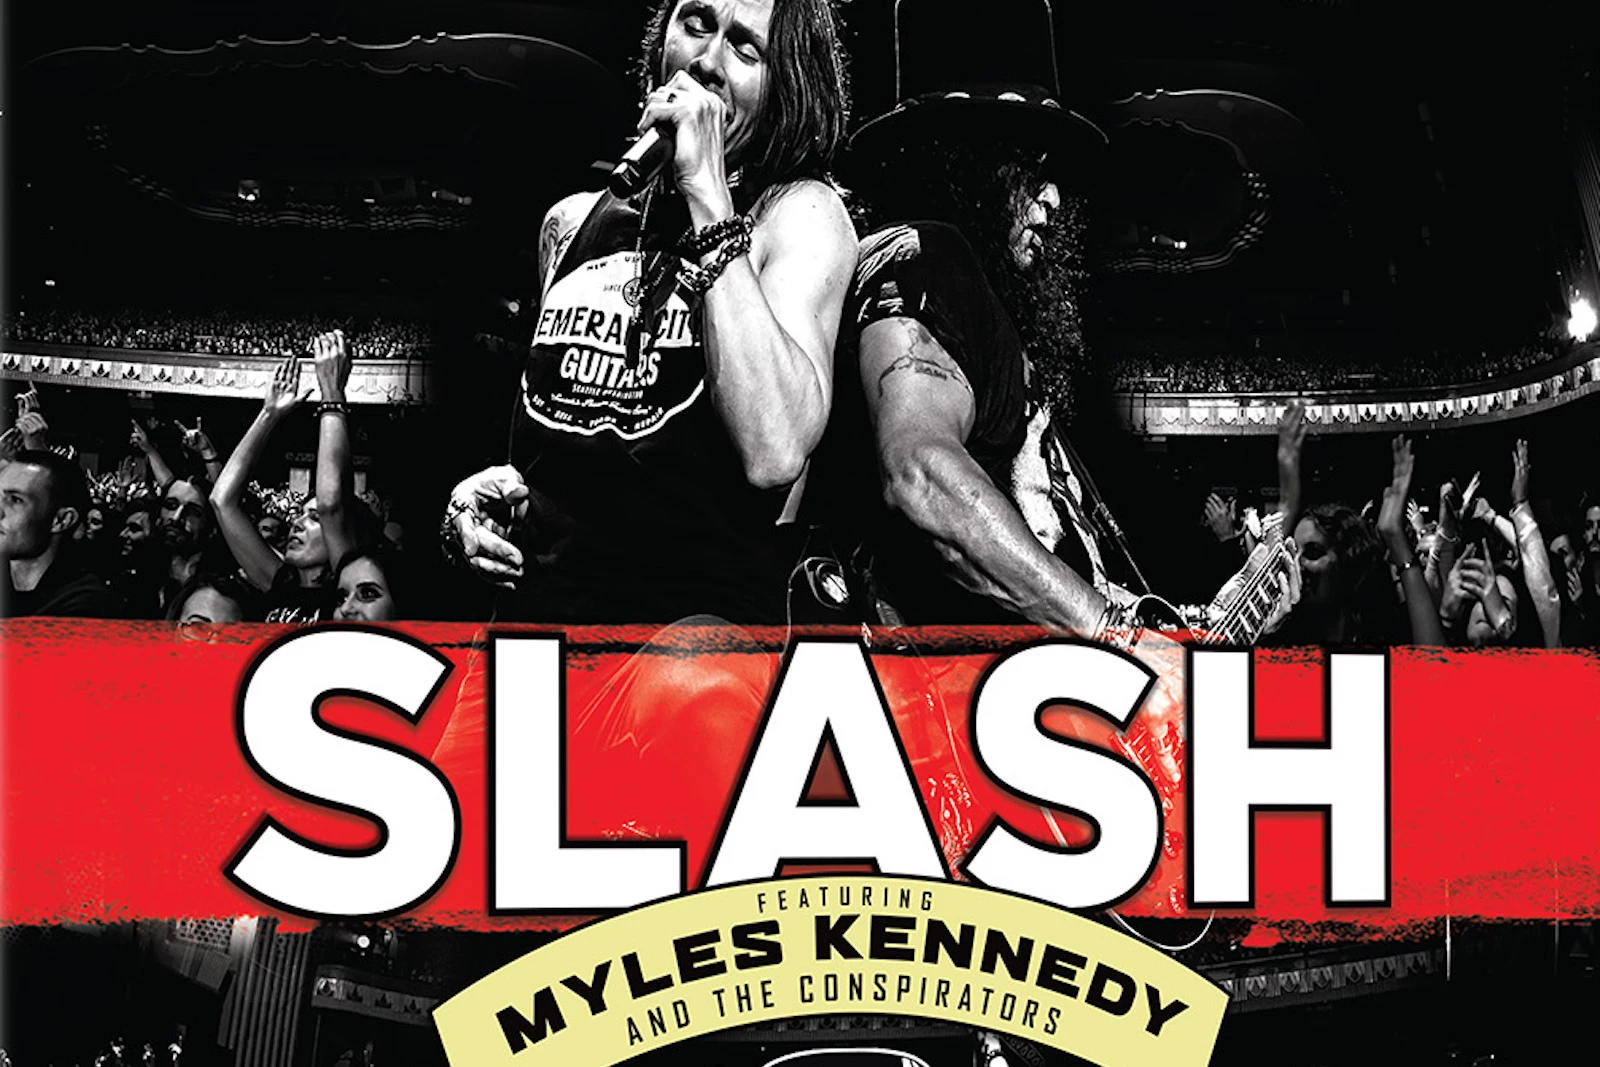 SLASH FEATURING MYLES KENNEDY Living Dream Tour JAPAN BLU-RAY AND 2 CD SET